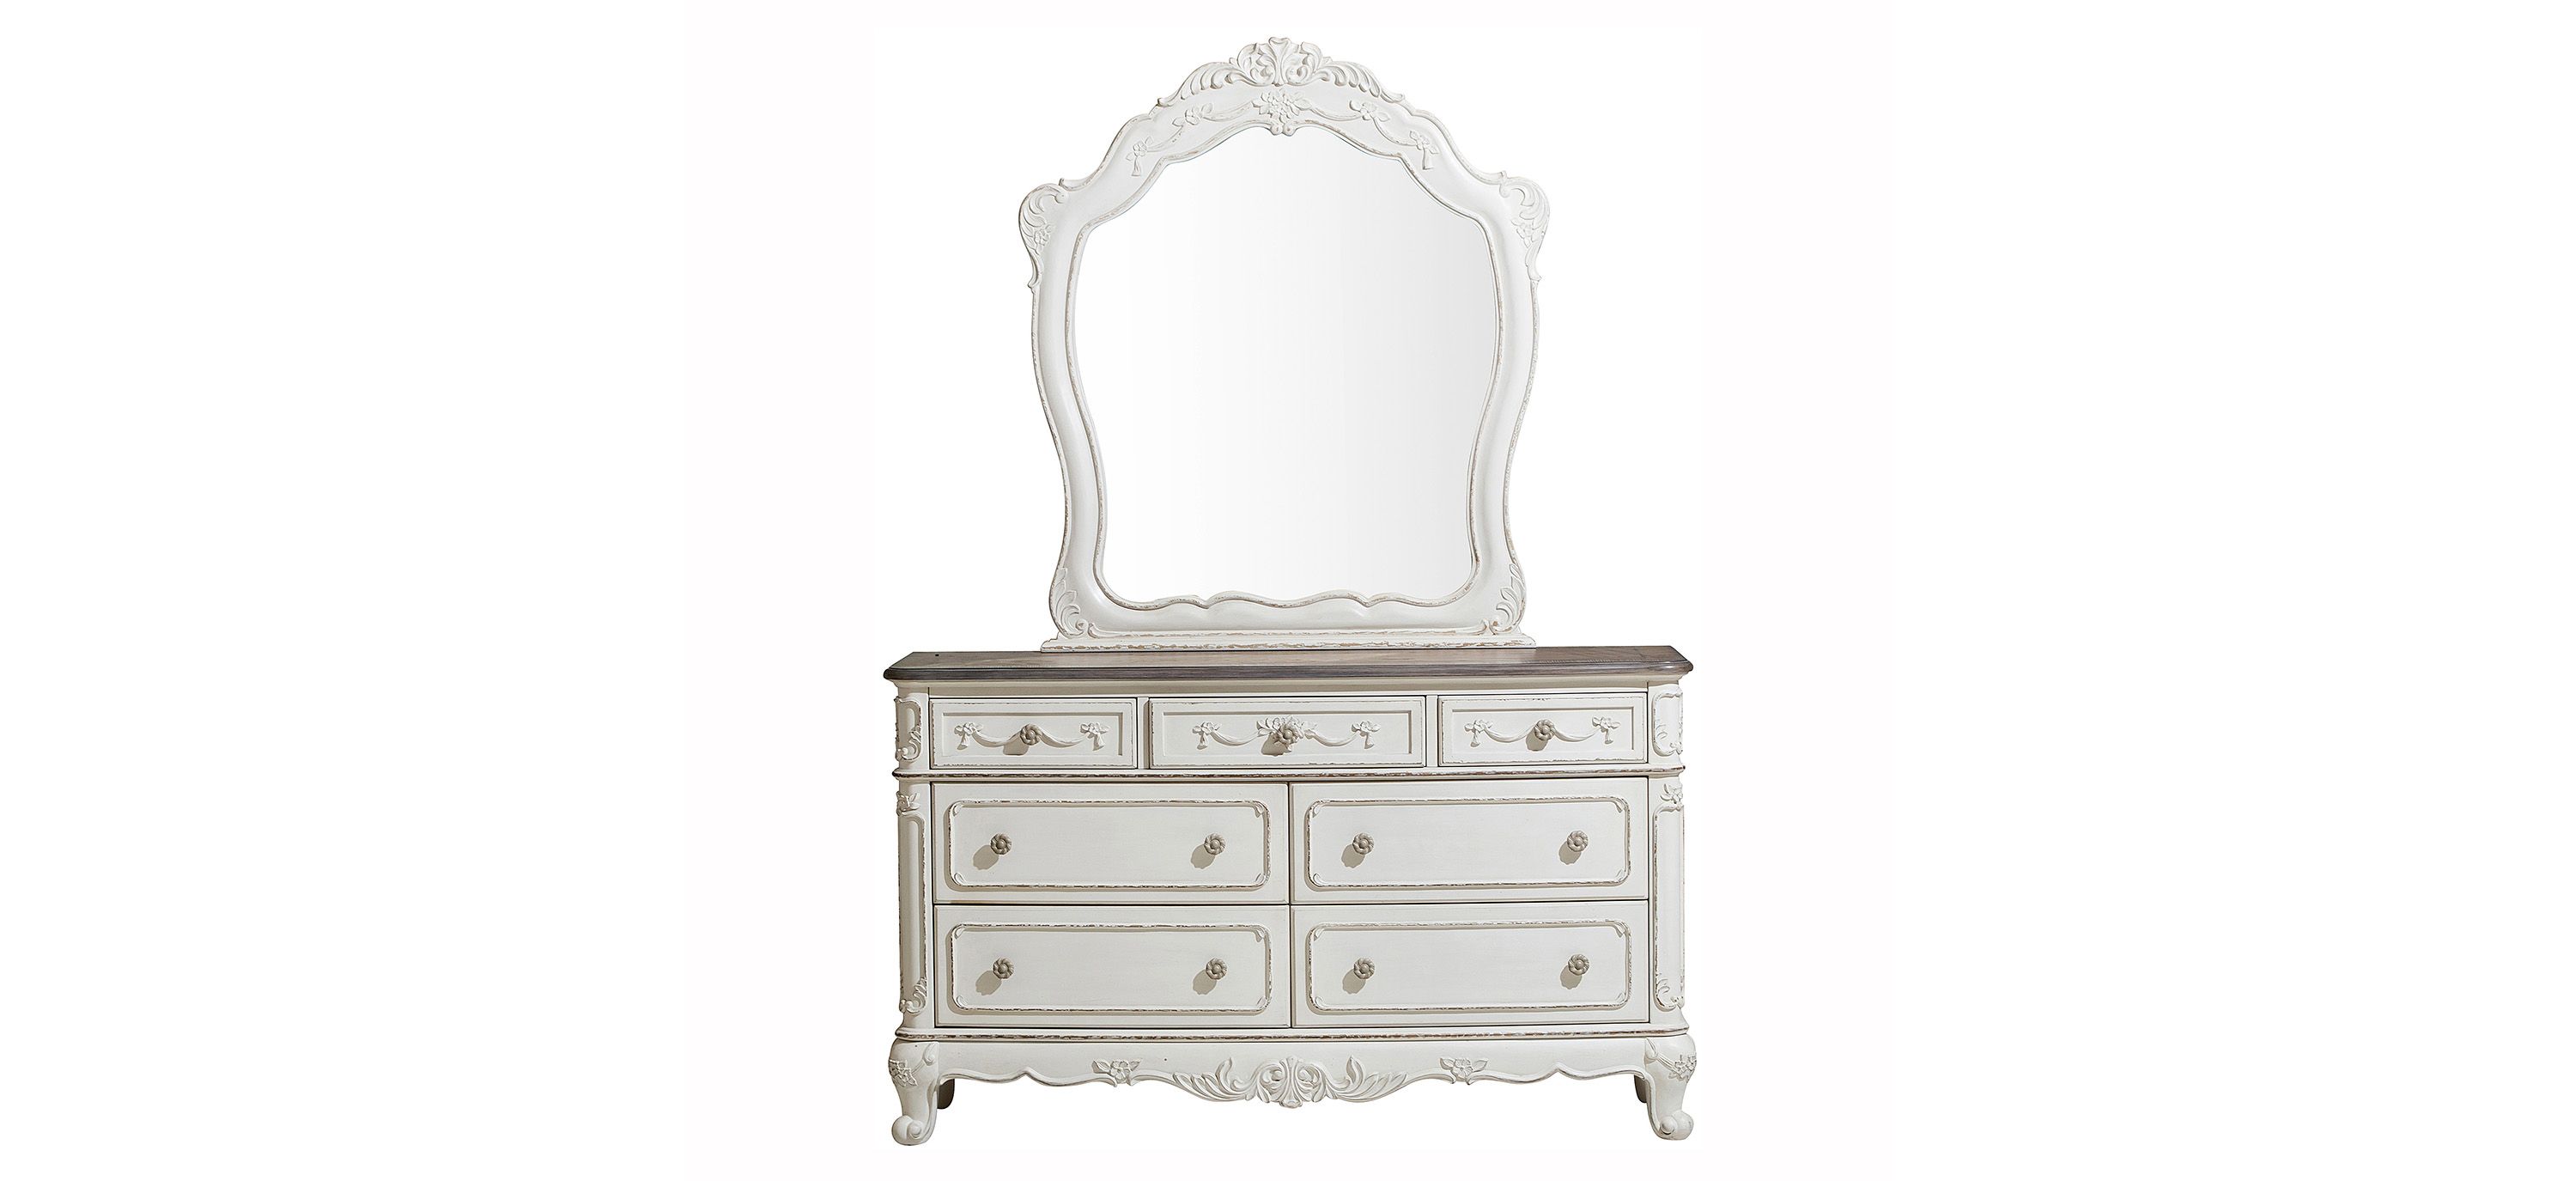 Averny 7-Drawer Bedroom Dresser with Mirror